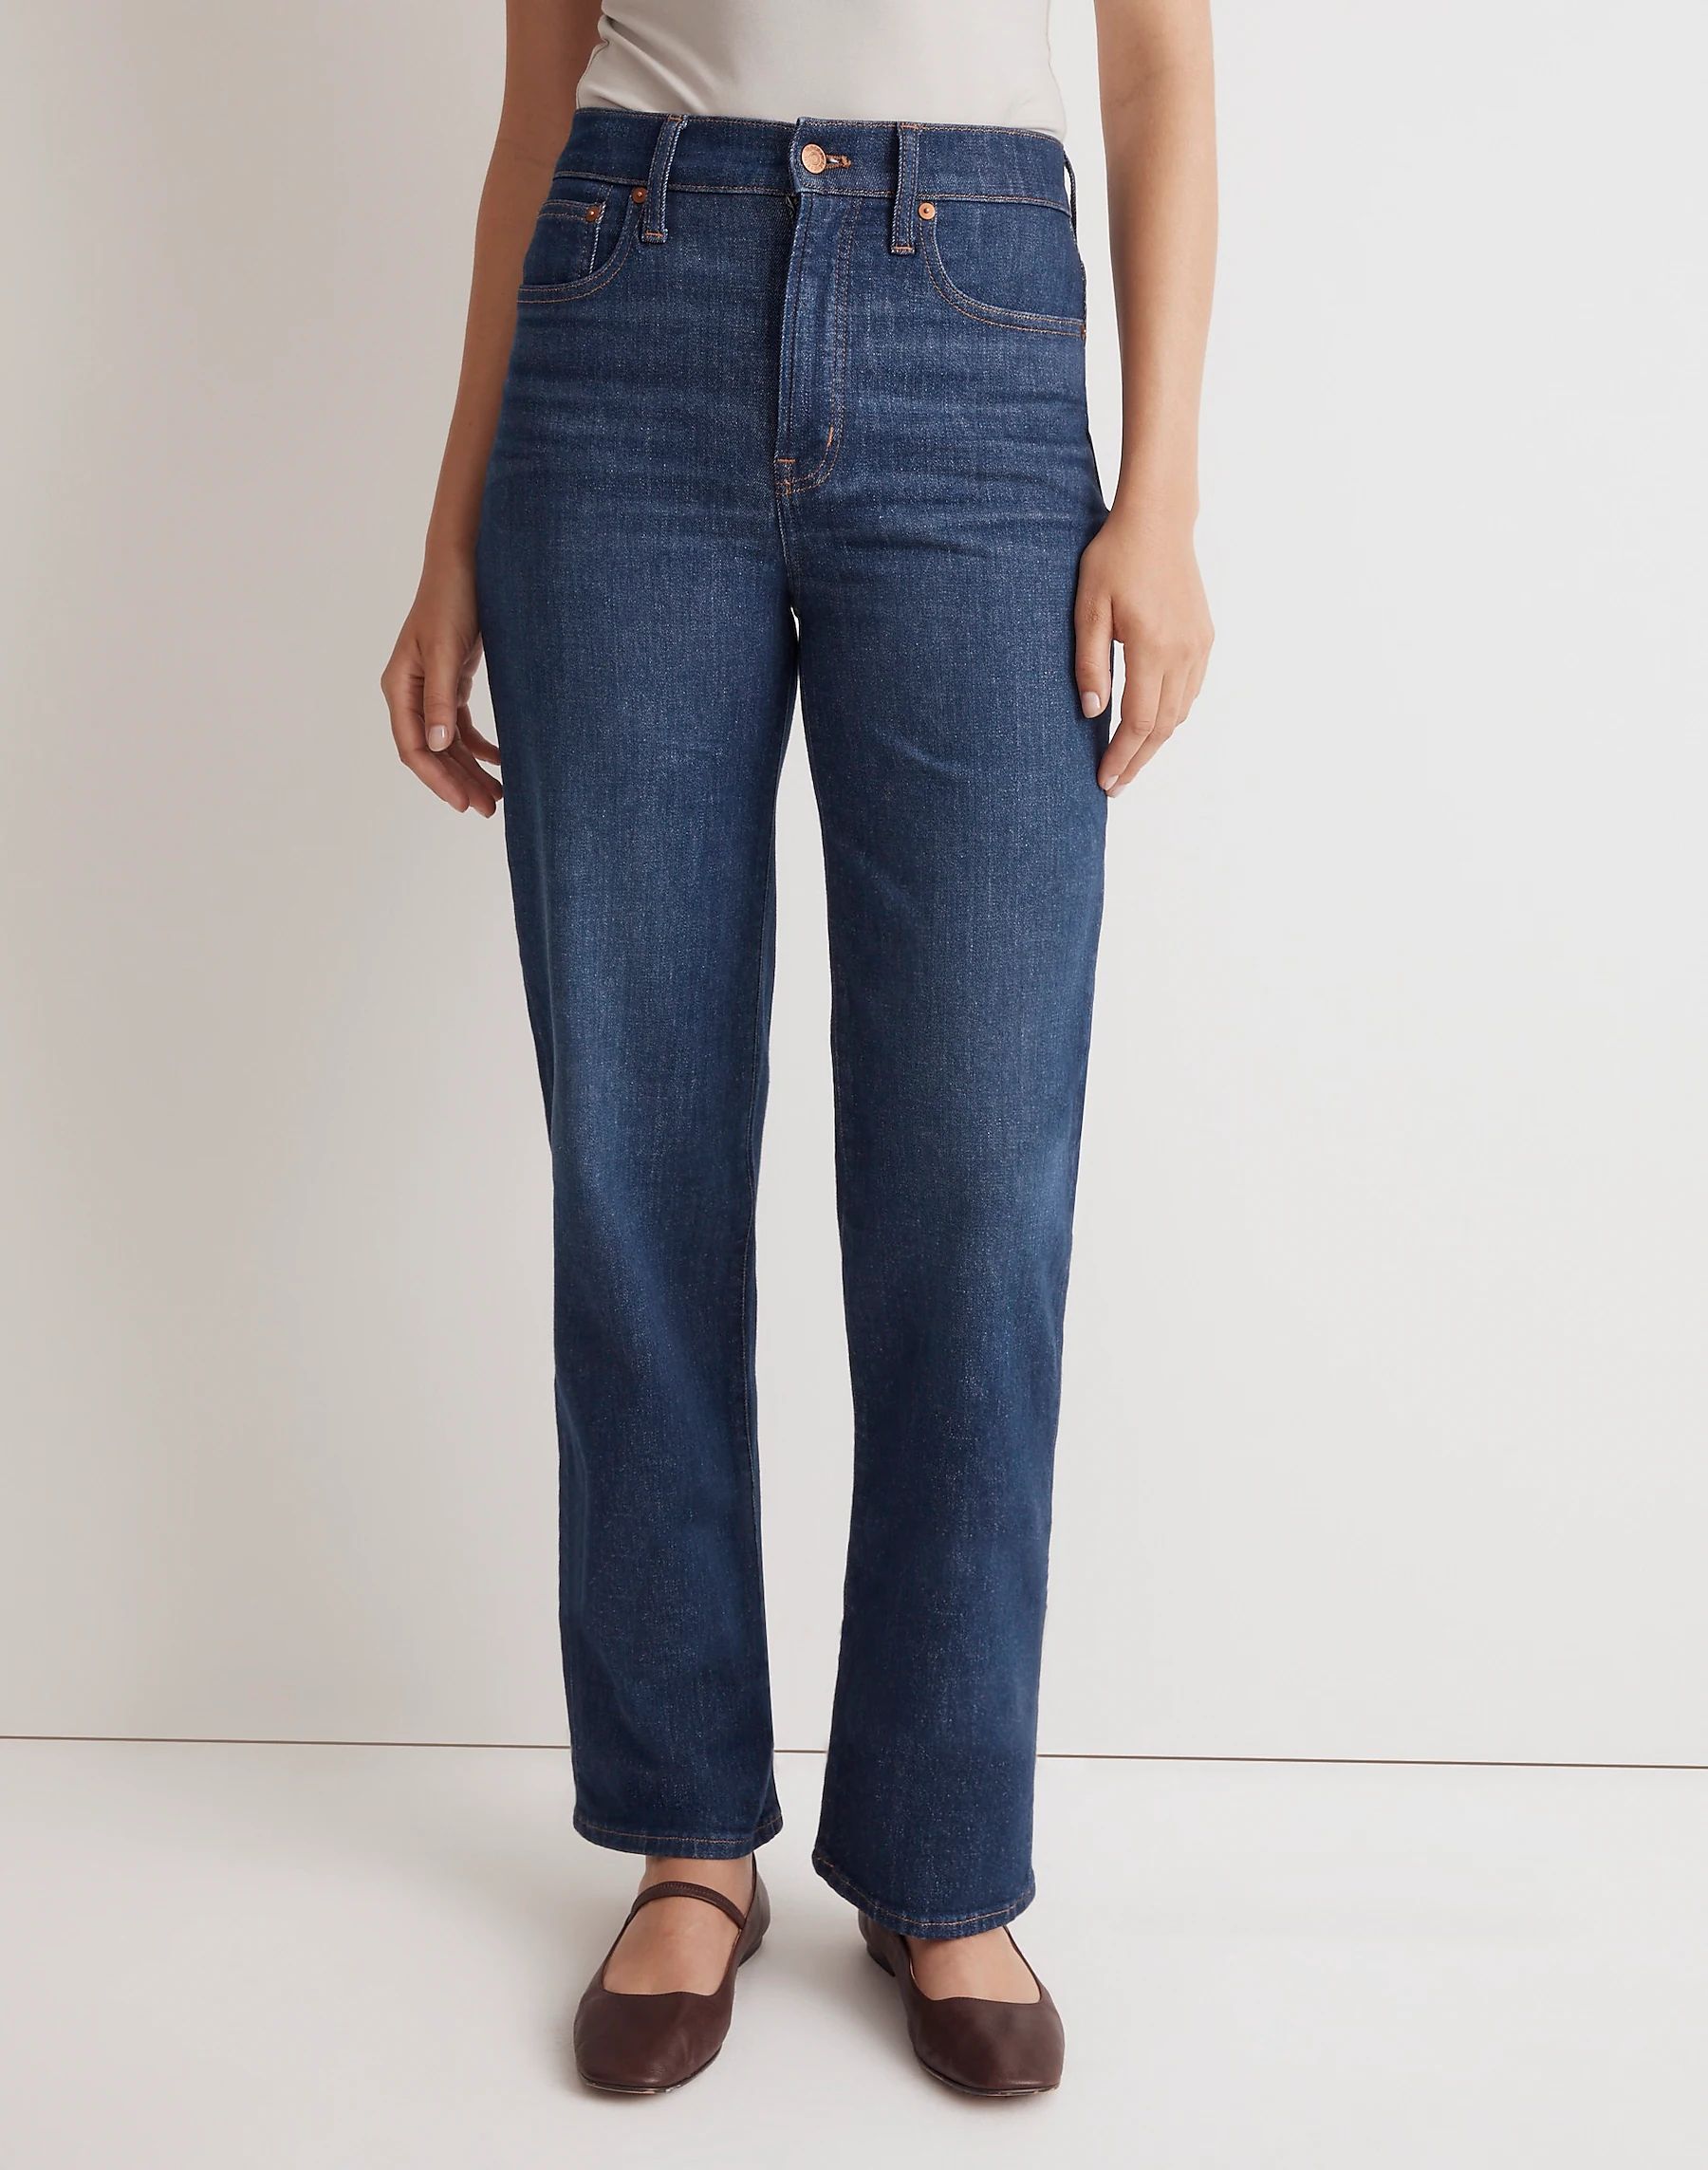 Under 5'4″ – We Got You Covered in Short Inseam Jeans! - Denimology